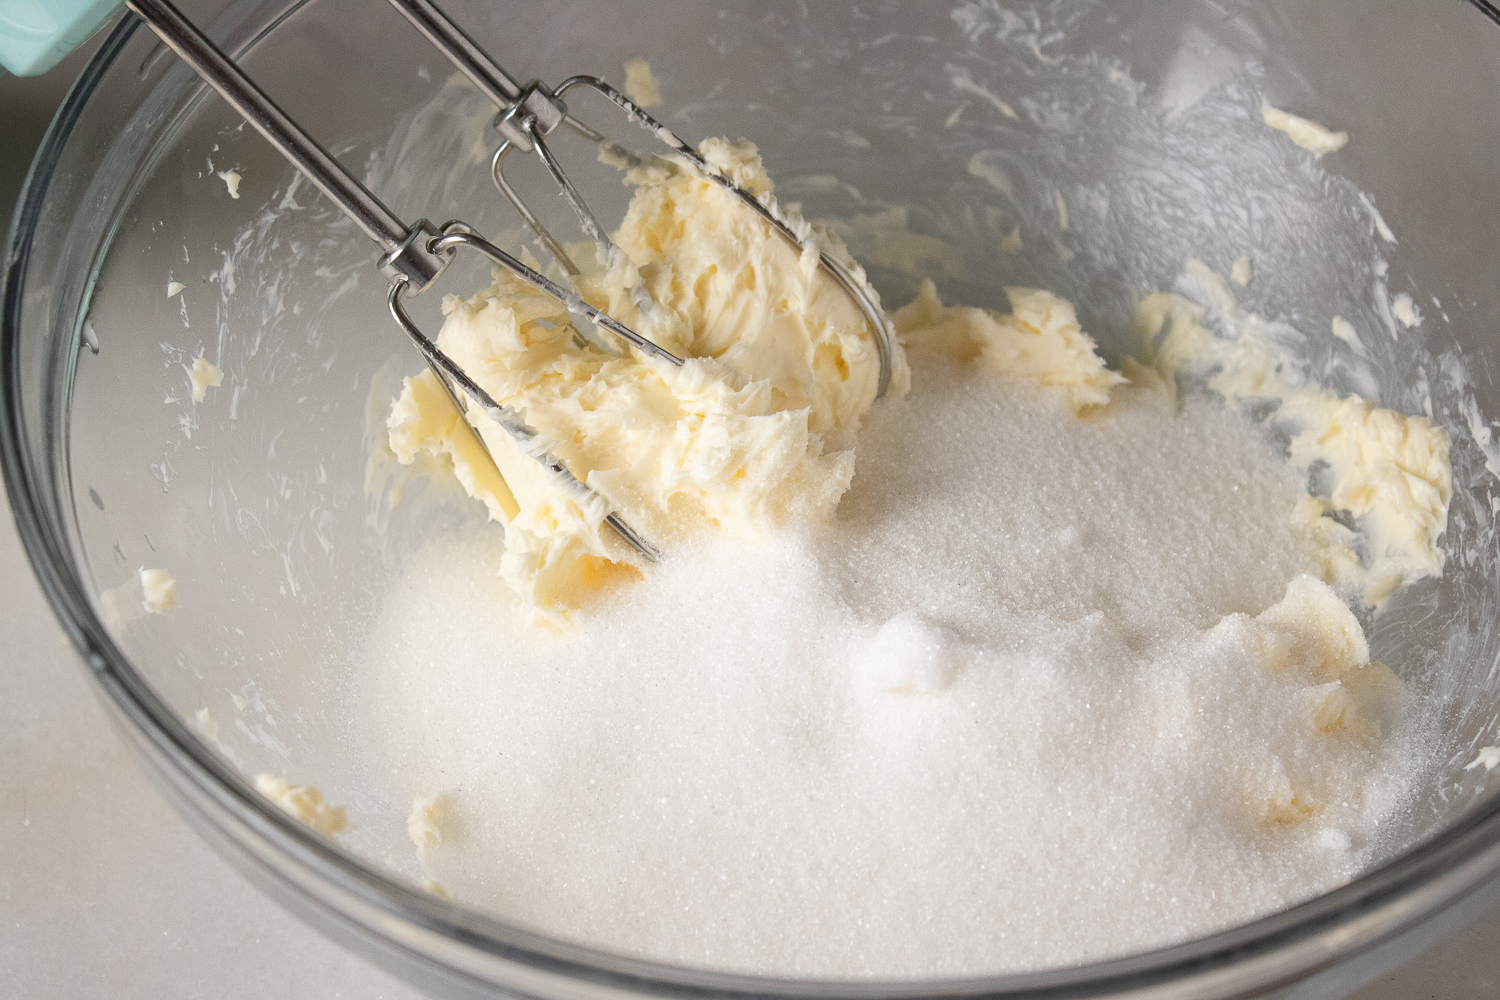 Combining the butter and sugar.